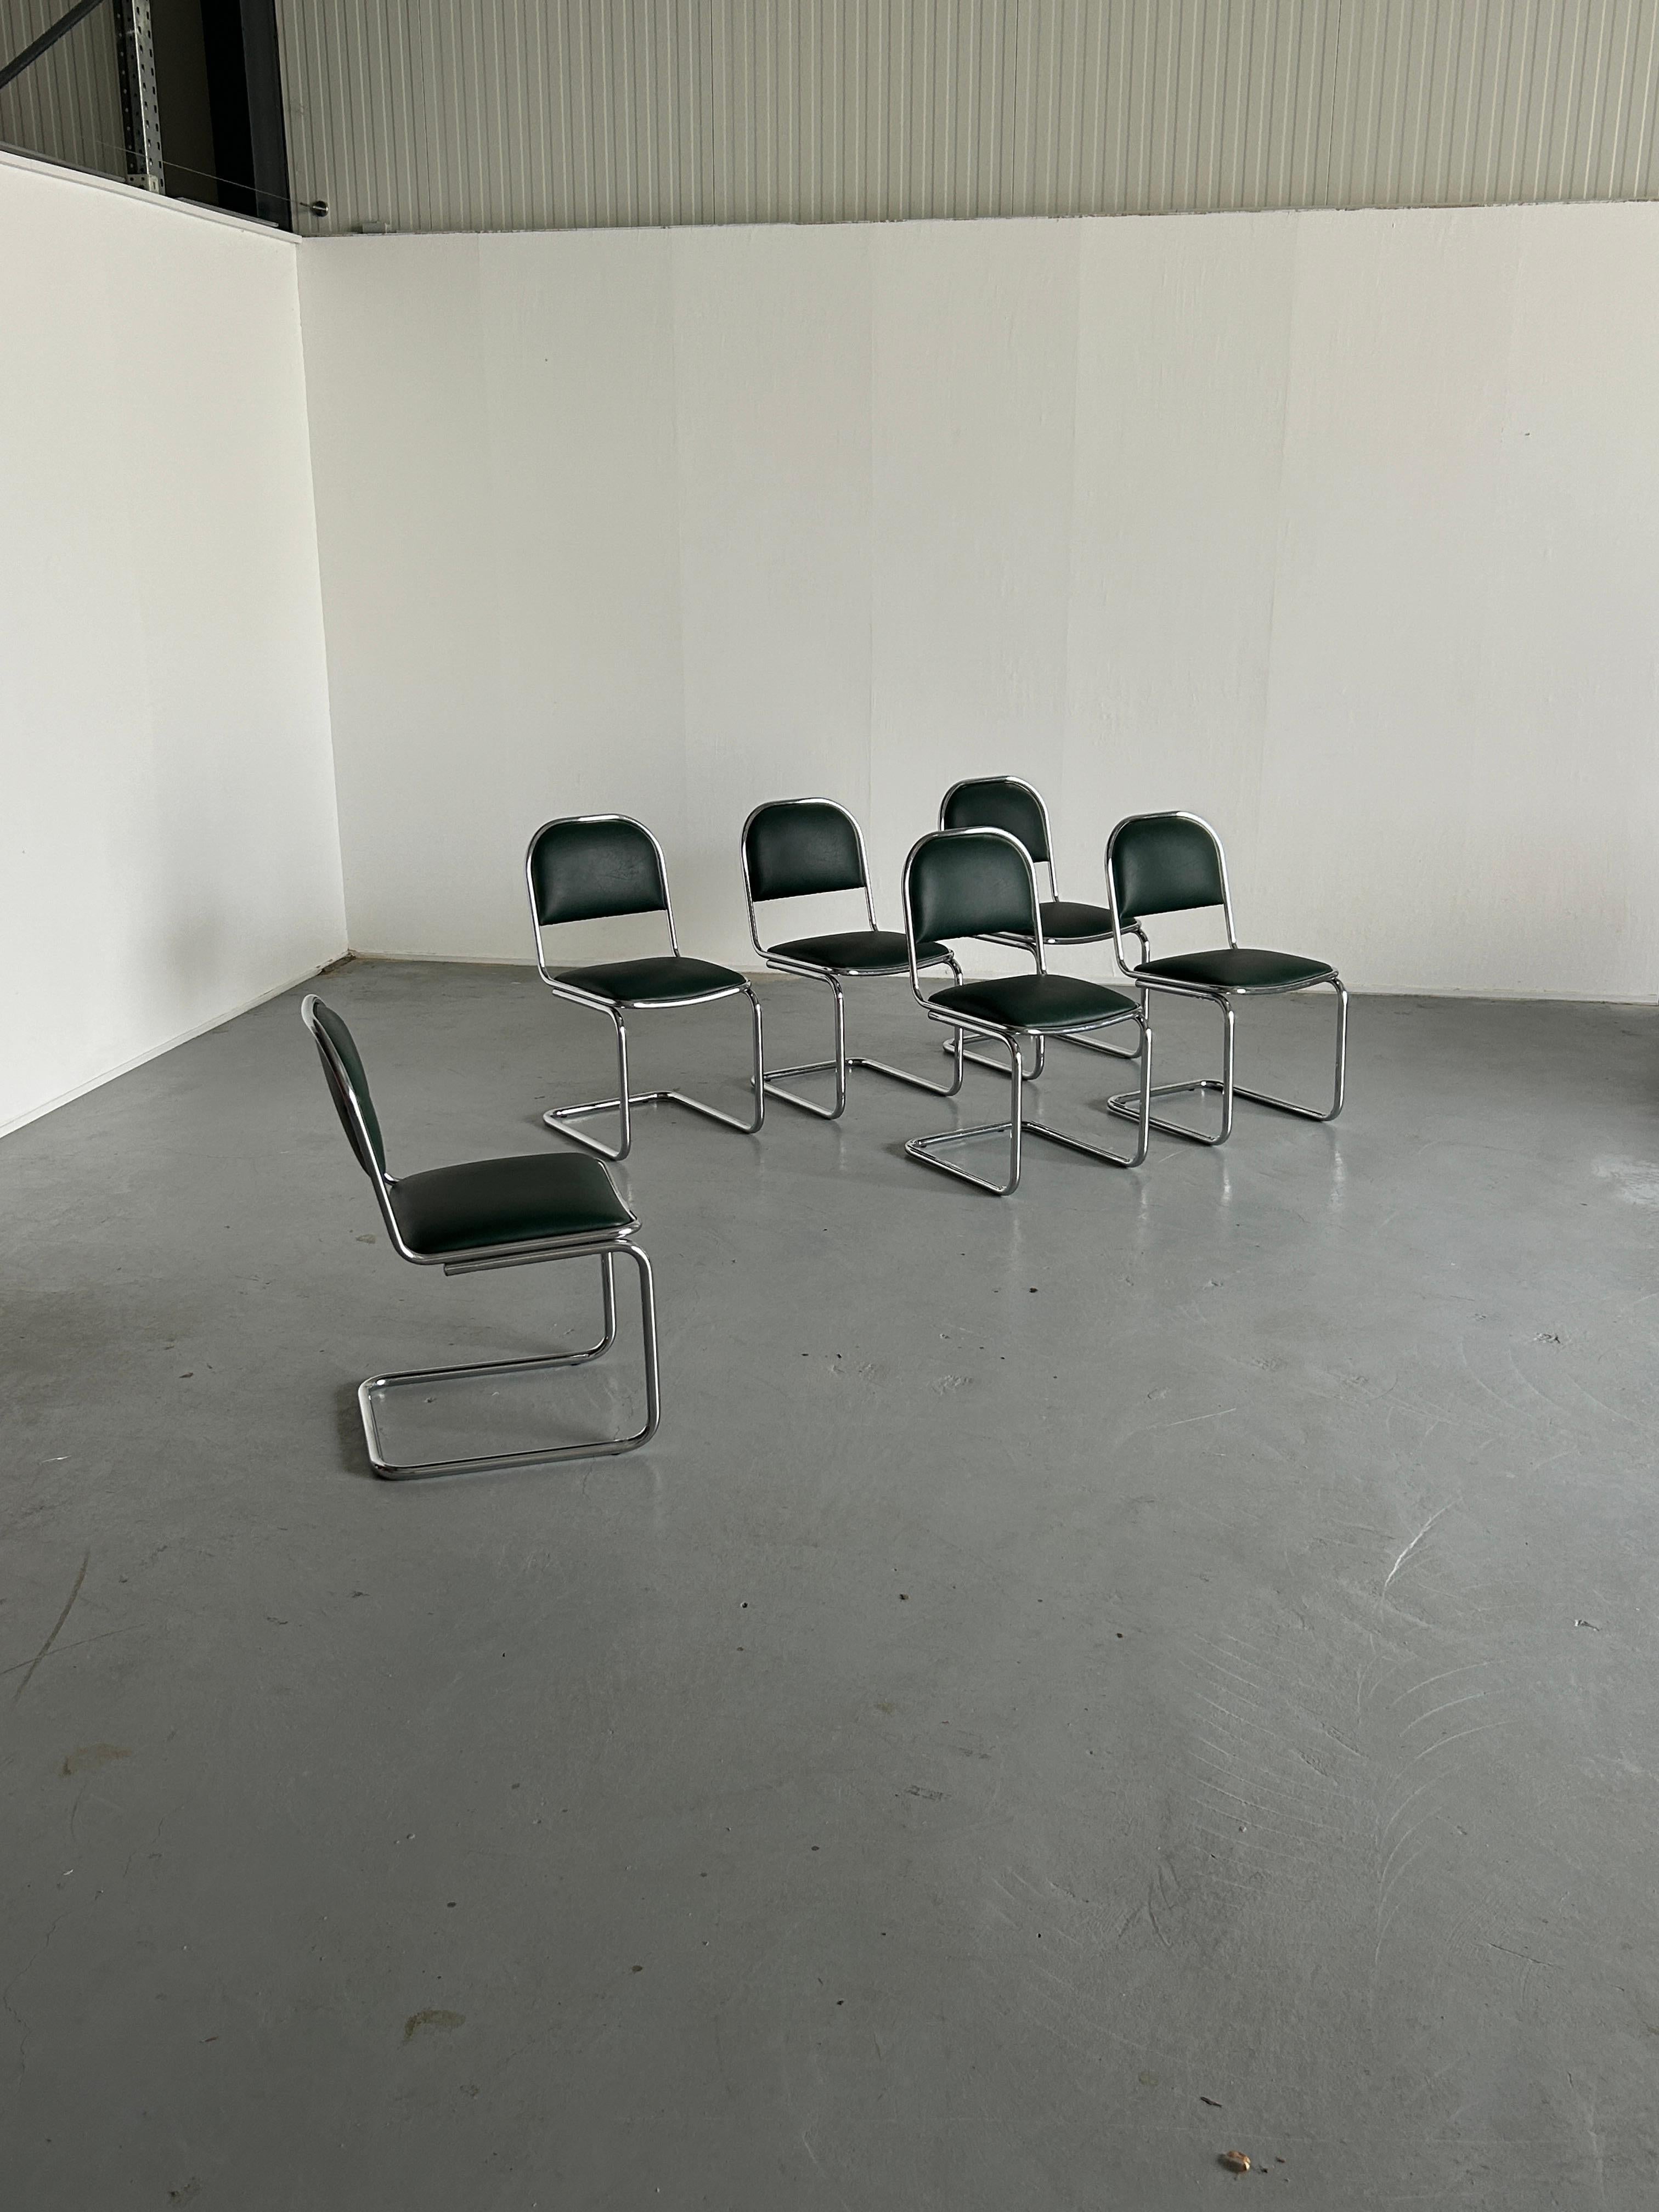 Italian  1 of 6 Bauhaus Design Chrome Tubular Steel and Green Faux Leather Chairs, 1980s For Sale